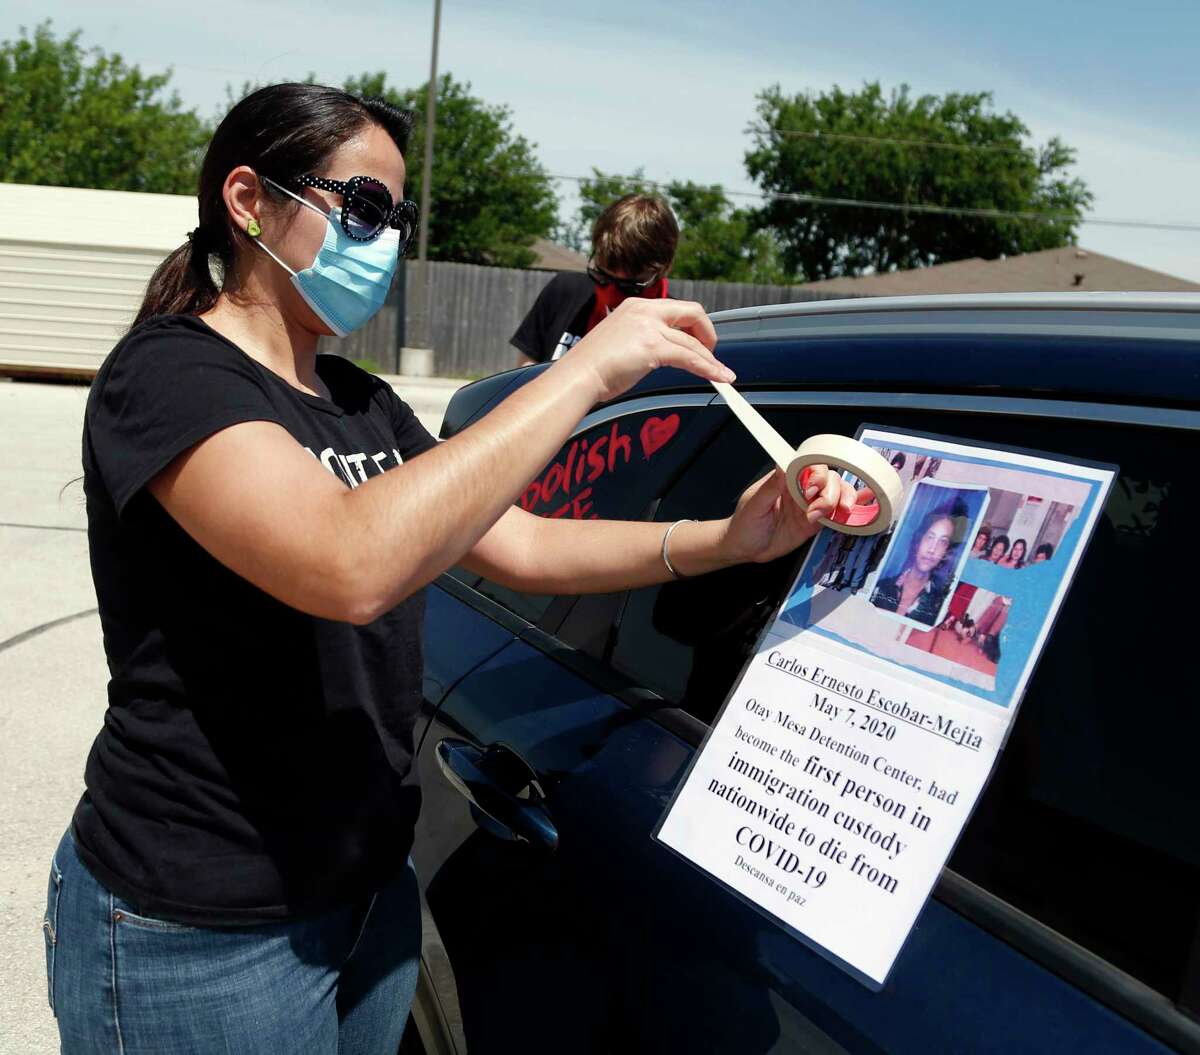 Rachael Tucker prepares her vehicle for the advocacy group car protest near the Karnes County Residential Center 409 FM1144, Karnes City, Texas, 78118. Advocacy groups are protesting family detention amid the pandemic, as coronavirus spreads rapidly through detention facilities across the country on Saturday, May 16, 2020.